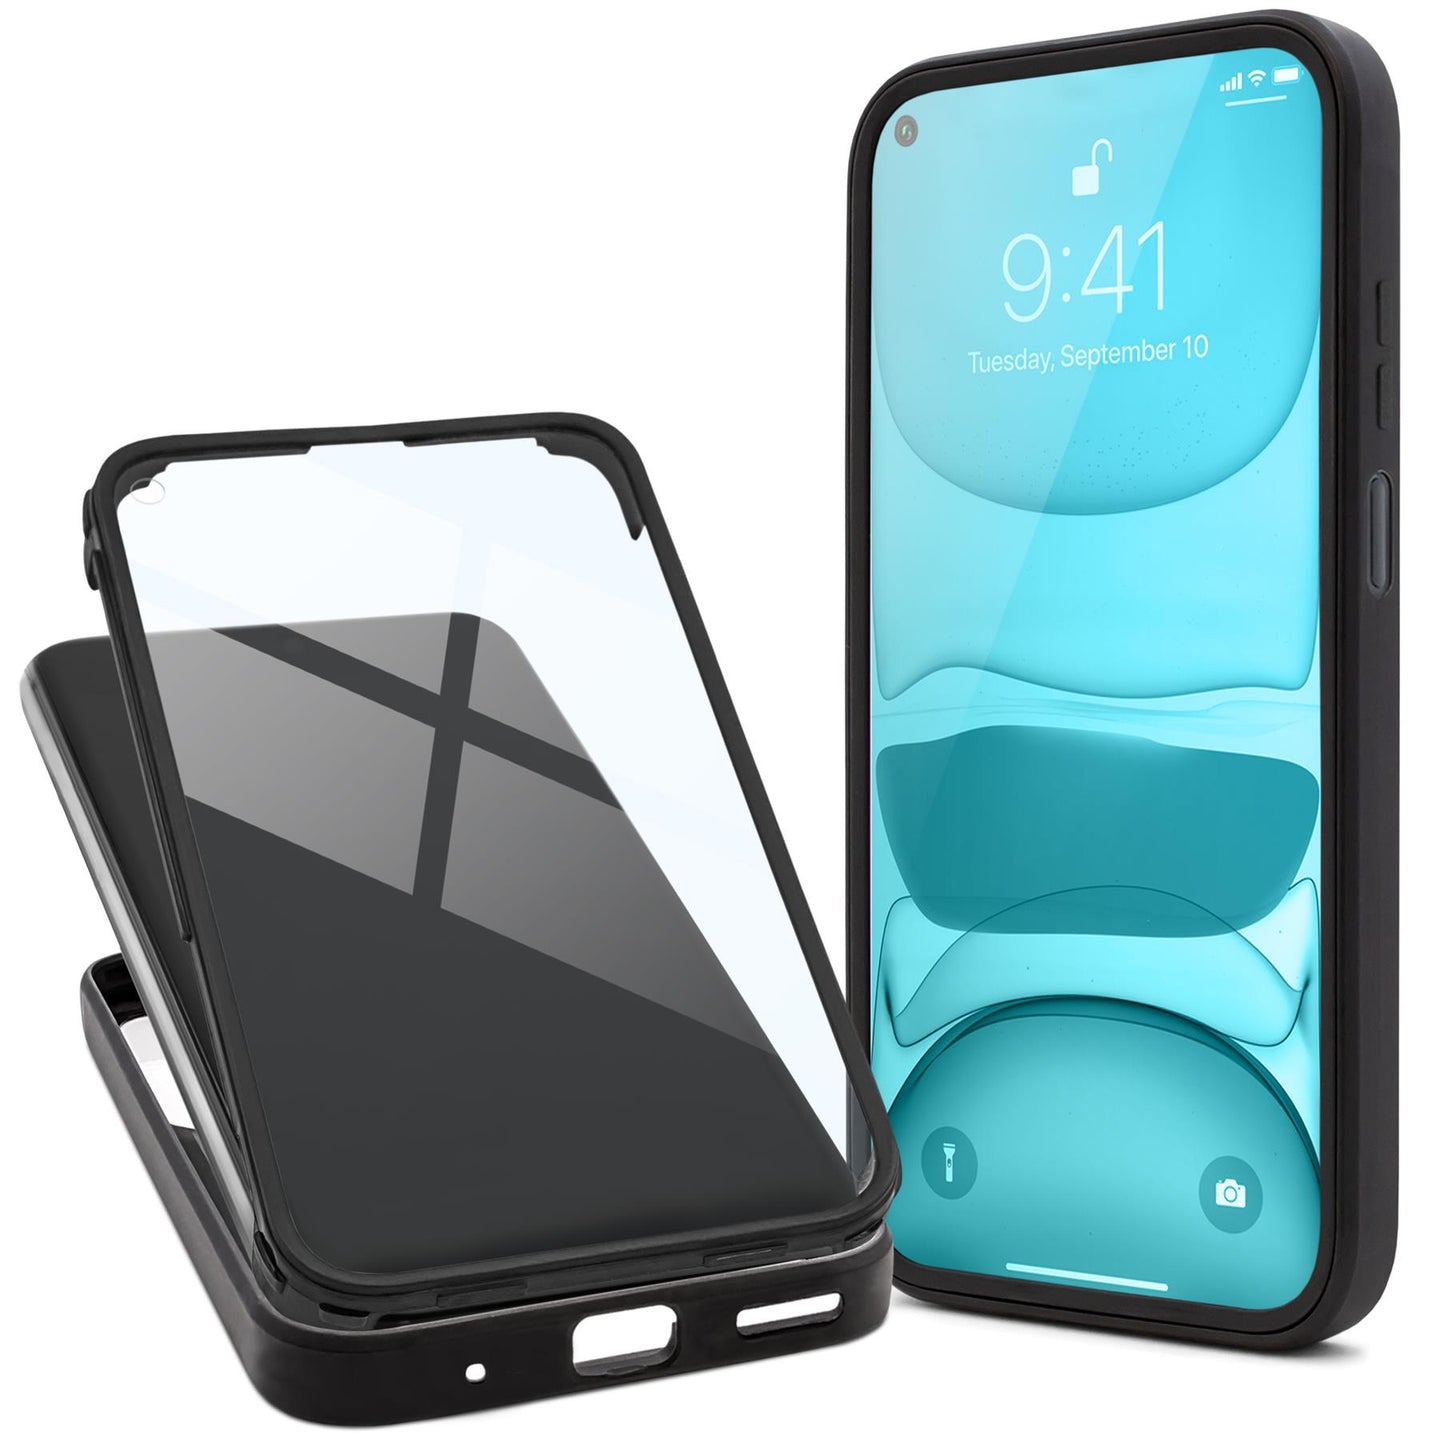 Moozy 360 Case for Huawei Nova 5T and Honor 20 - Black Rim Transparent Case, Full Body Double-sided Protection, Cover with Built-in Screen Protector